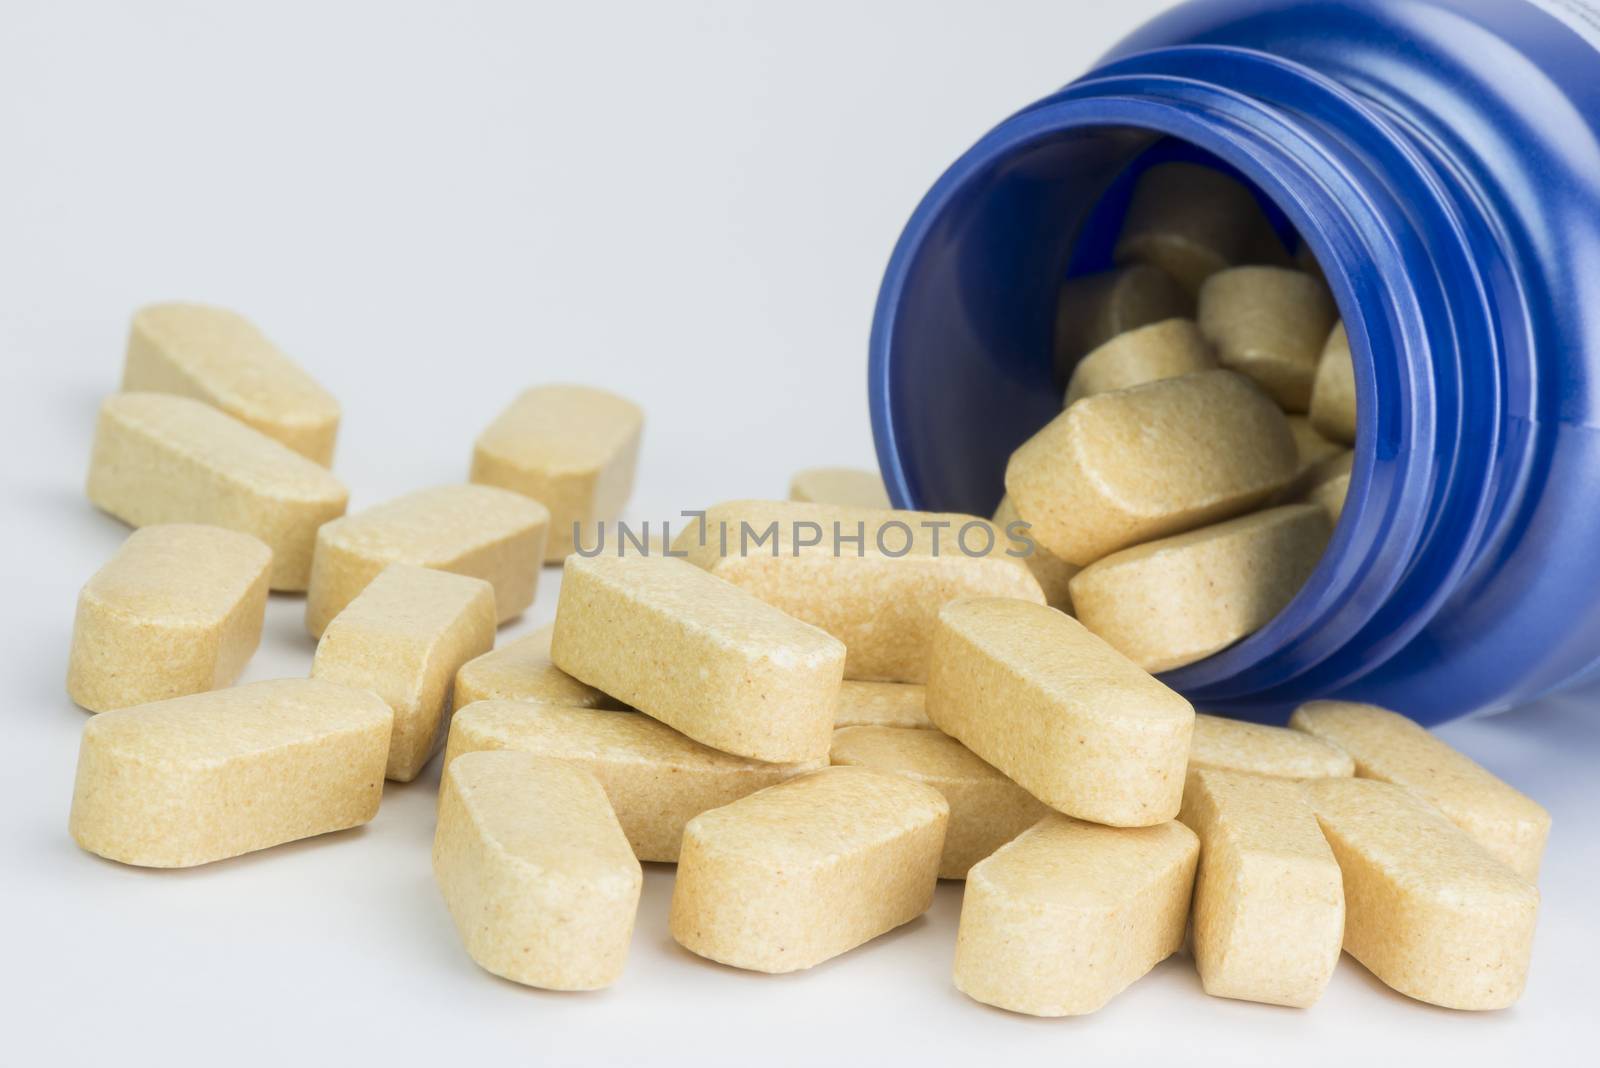 Yellow tablets from a blue medicine jar
 by Tofotografie